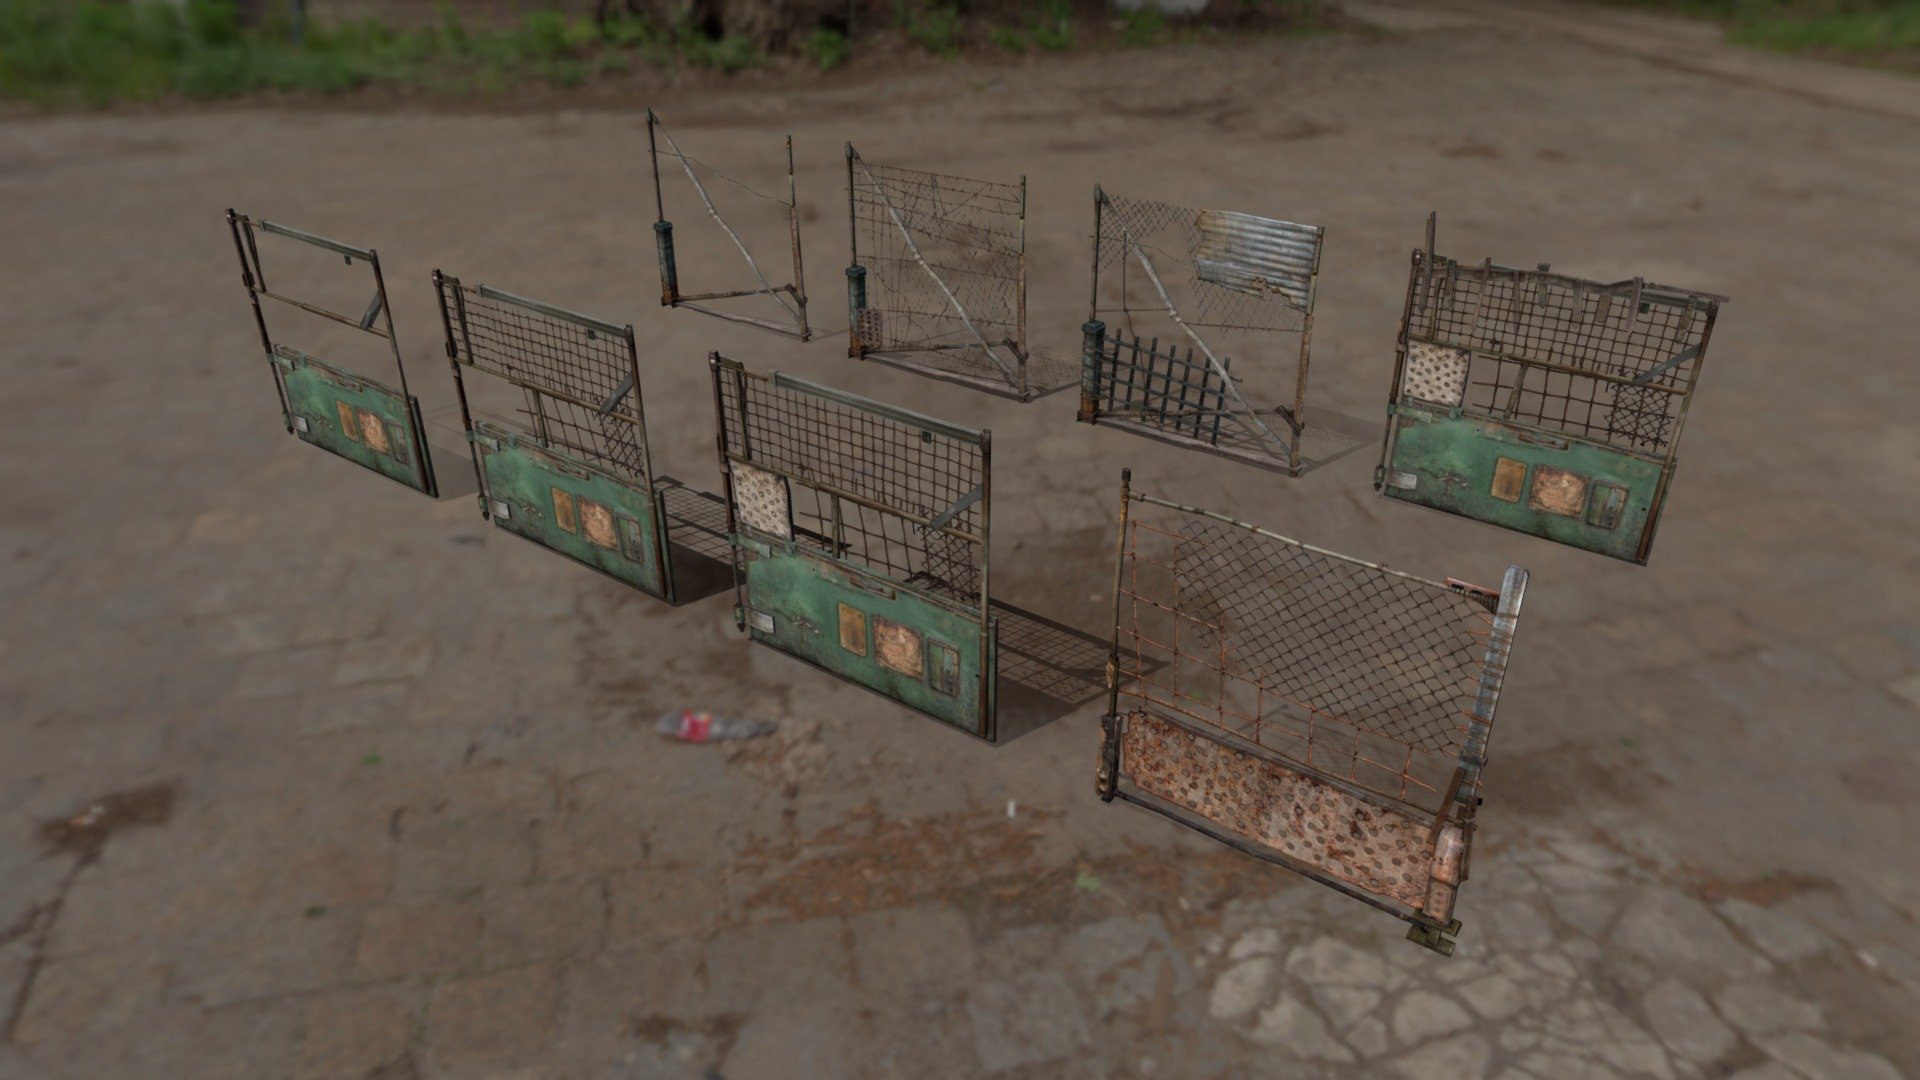 Fence assets based on Return To Ravenholm by Arkane Studios.
https://combineoverwiki.net/wiki/File:RTR_doors.jpg

Recreating them was made possible thanks to Noclip's gameplay footage and release of some of Arkane's concept art. 
The pack was created for use in Half-Life 2/Source 1 mods. 

You can download the compiled assets here https://drive.google.com/file/d/1xMXDP0WUVAZMMBWuGJ9MgSFkqwSg1N2W/view?usp=sharing
Alternatively, download and rate here https://gamebanana.com/models/4844 

Unfortunately, I cannot really put them up on Sketchfab because the compiled models also have LOD and engine-specific material settings.

Meshes by Cvoxalury, textures by A. Shift. Original designs by Arkane Studios / Jean-Luc Monnet. 
Released under Creative Commons. Use them however you like, just give proper credit if you do 3d model